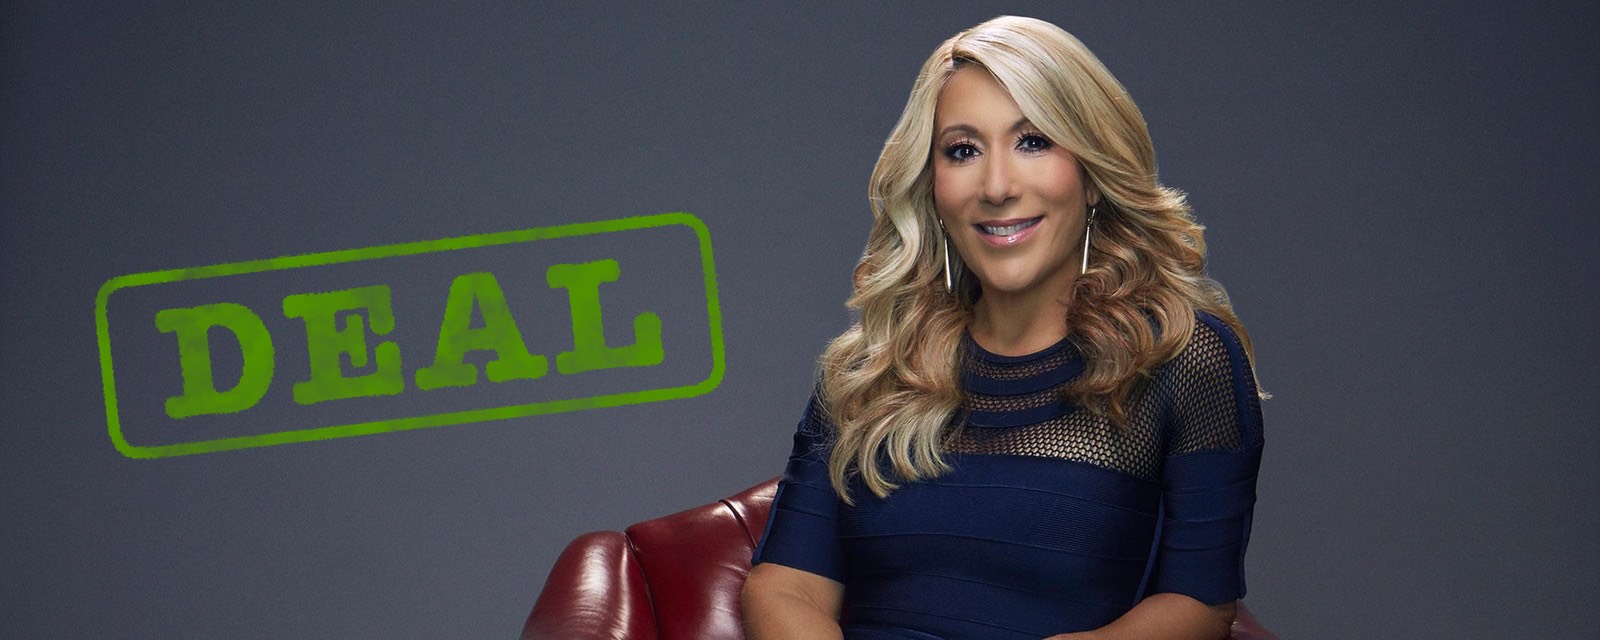 Lori Greiner News: Lori Greiner teams up with Handy Pan, snubs other sharks  - The Economic Times